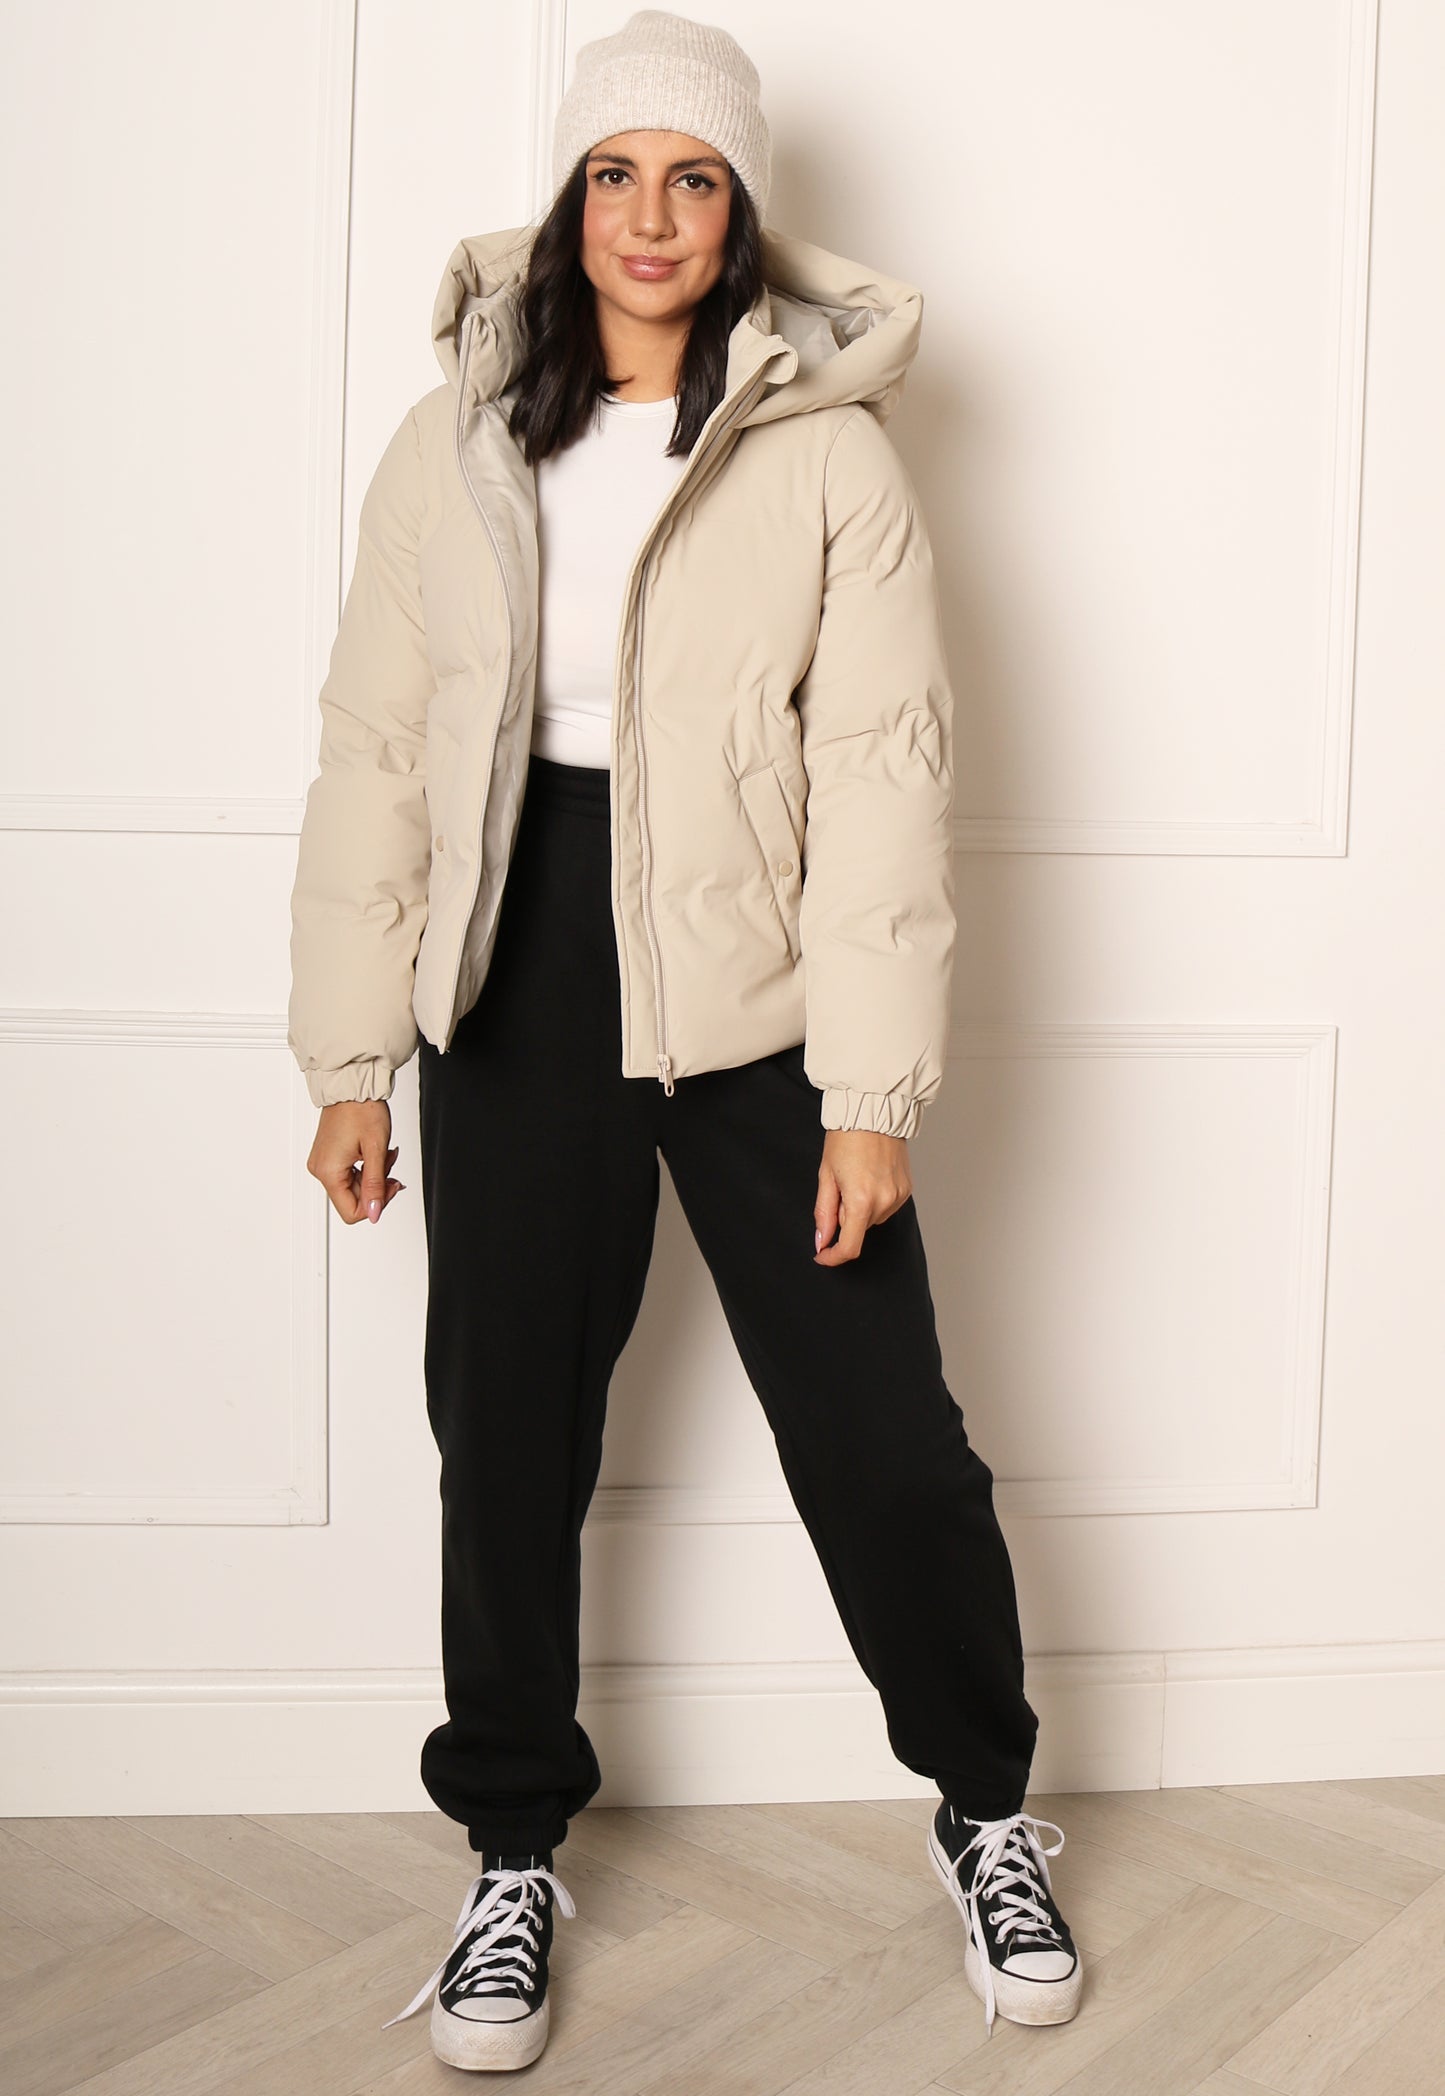 VERO MODA Noe Short Water Repellent Quilted Puffer Jacket with Hood in Beige - One Nation Clothing